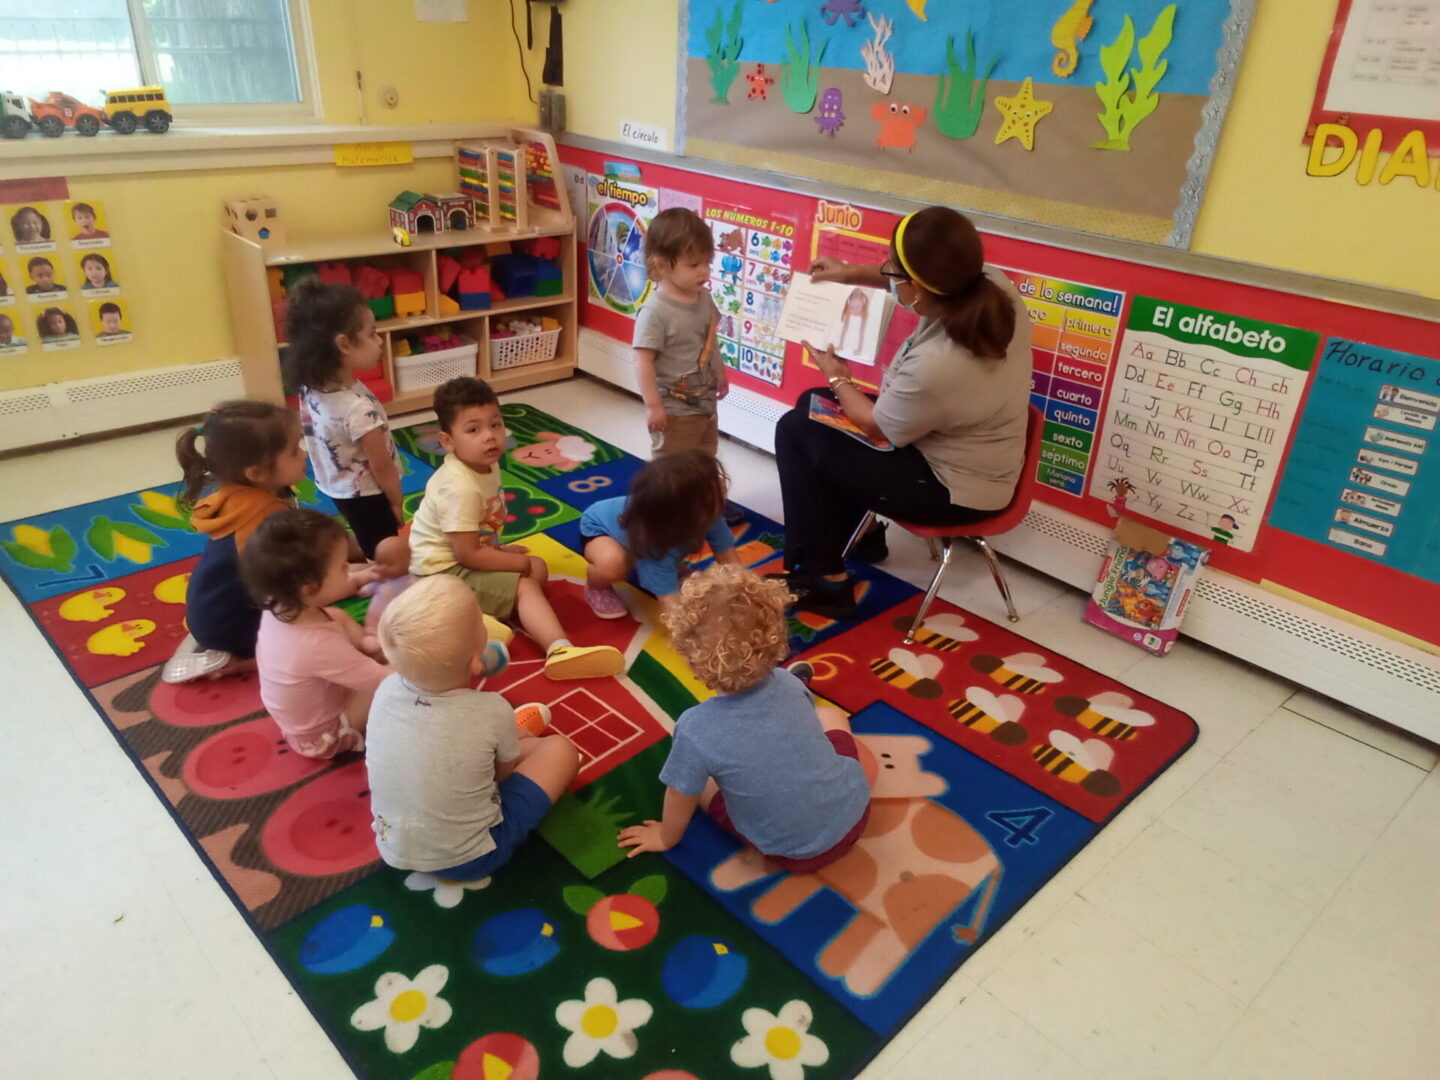 A picture of group of children in a classroom with a teacher